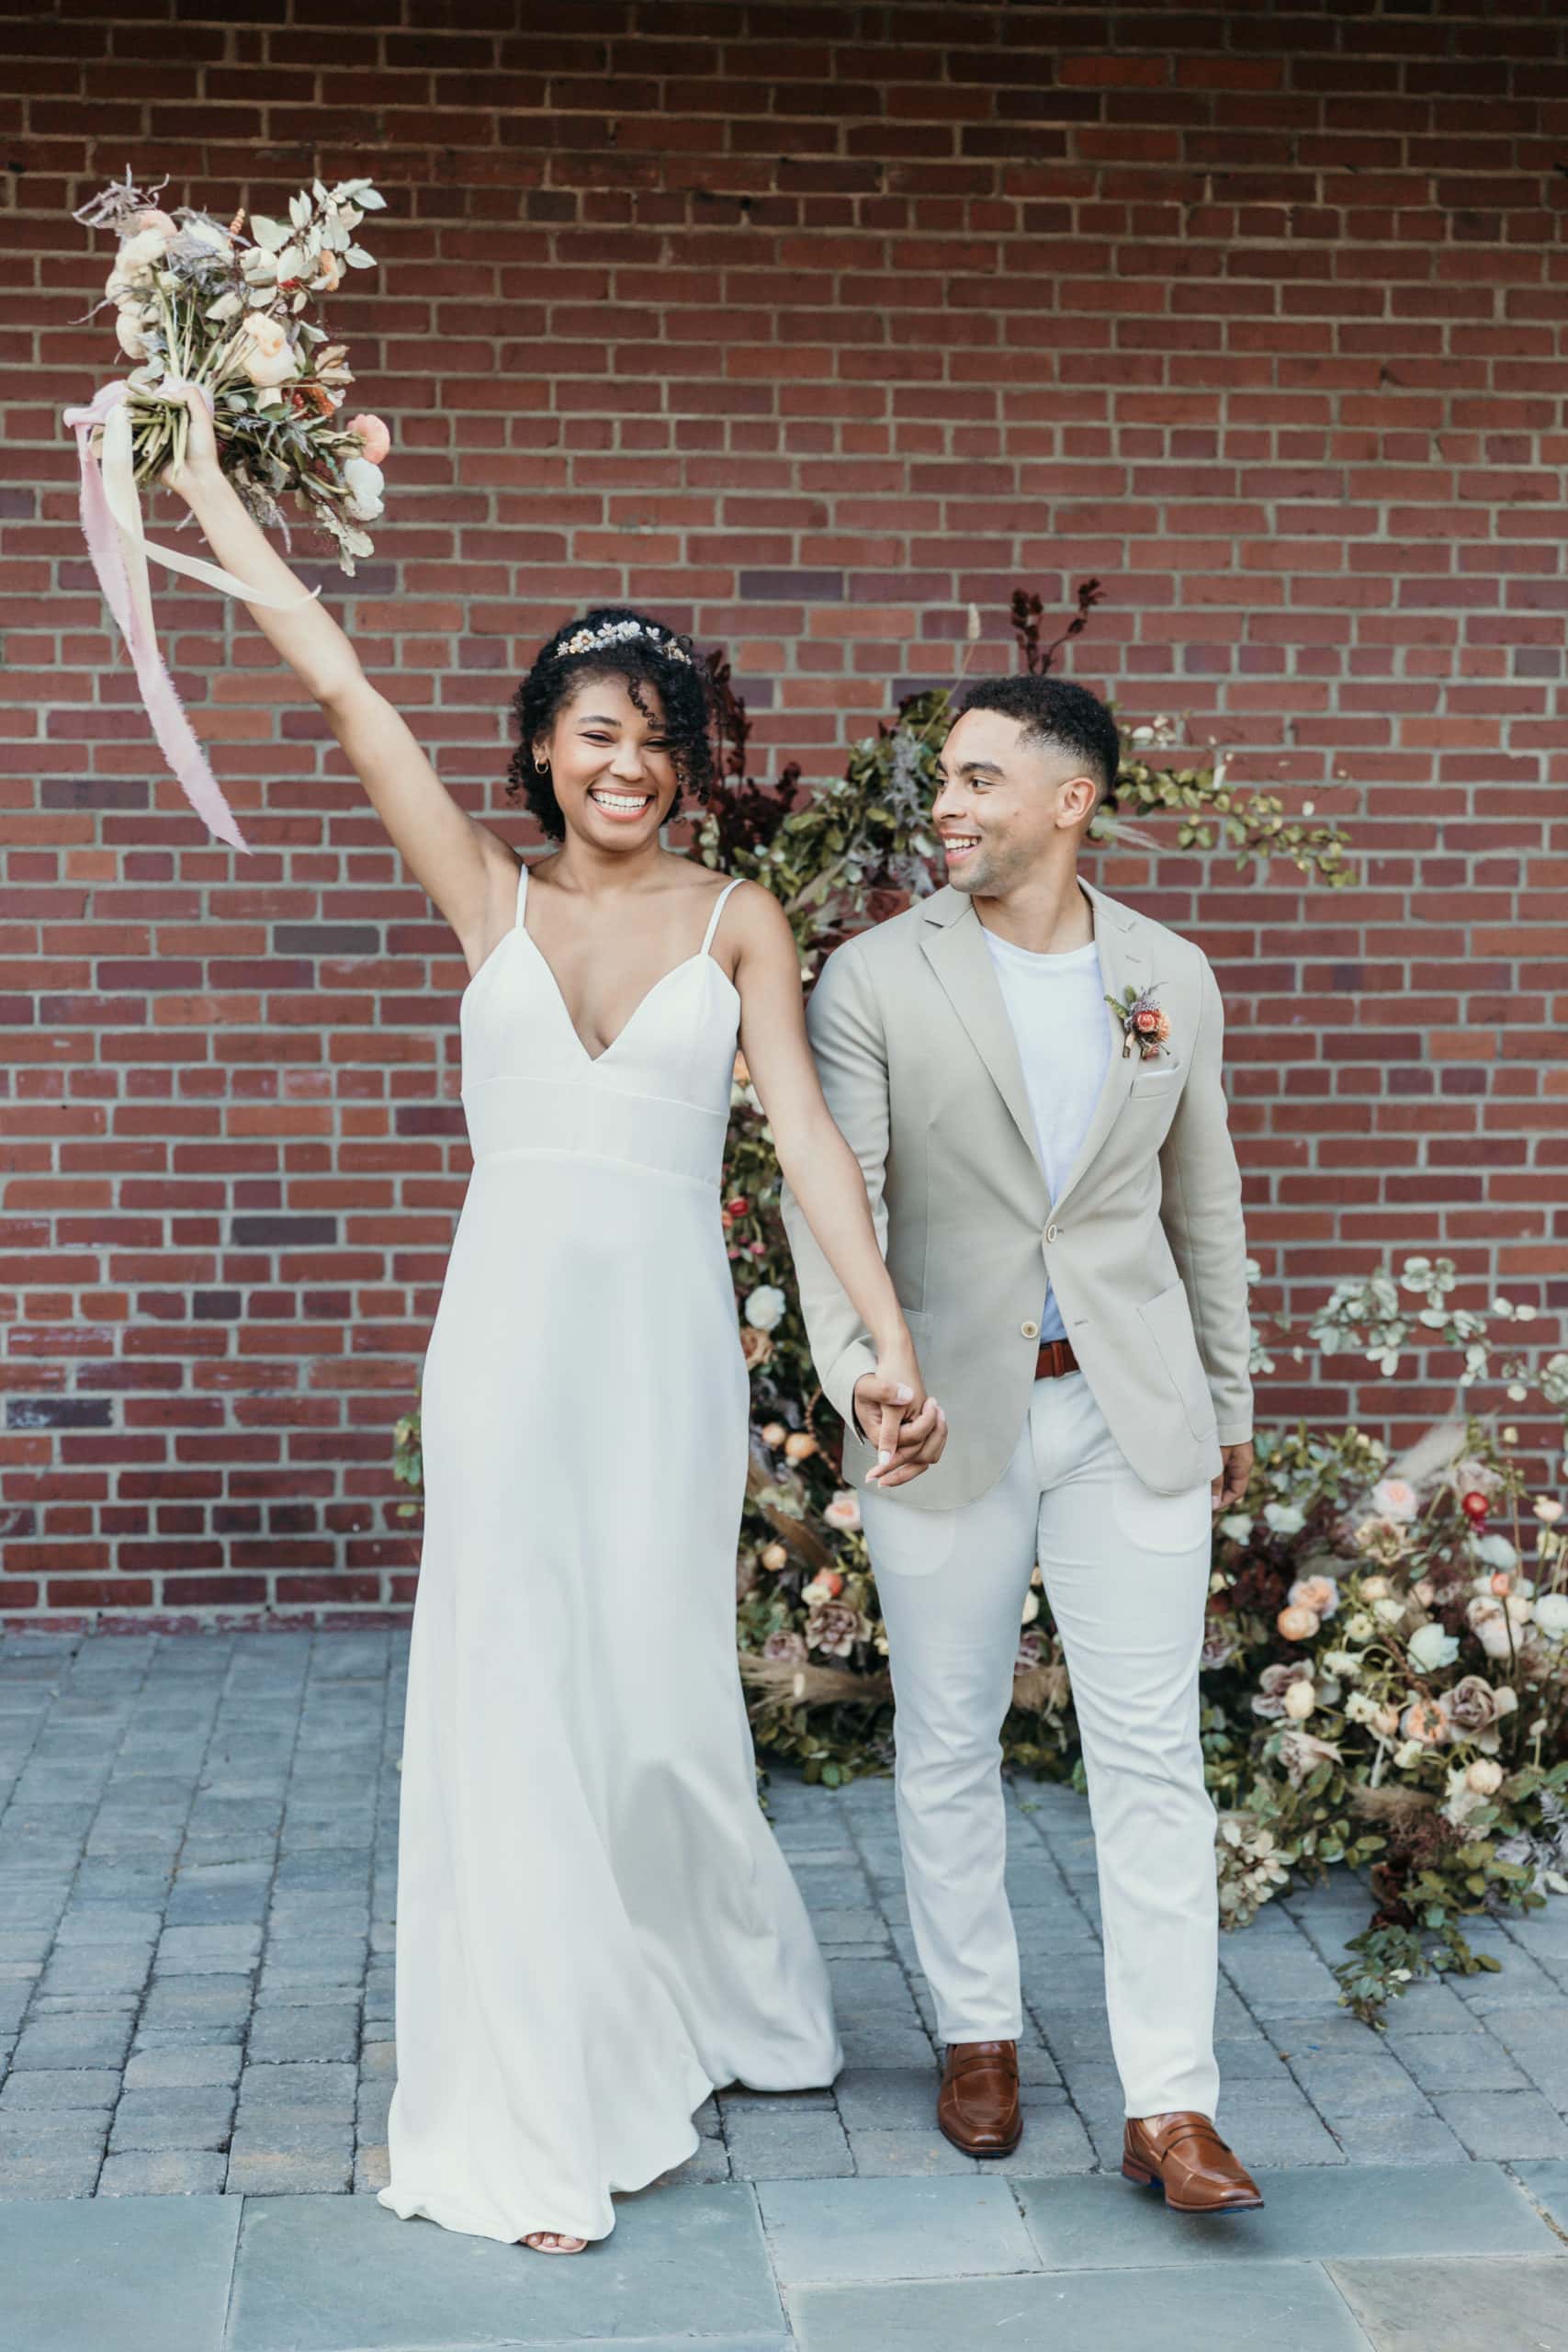 wedding photographer, a delighted bride holds groom's hand, her other hand holds a floral bouquet in the air in celebration